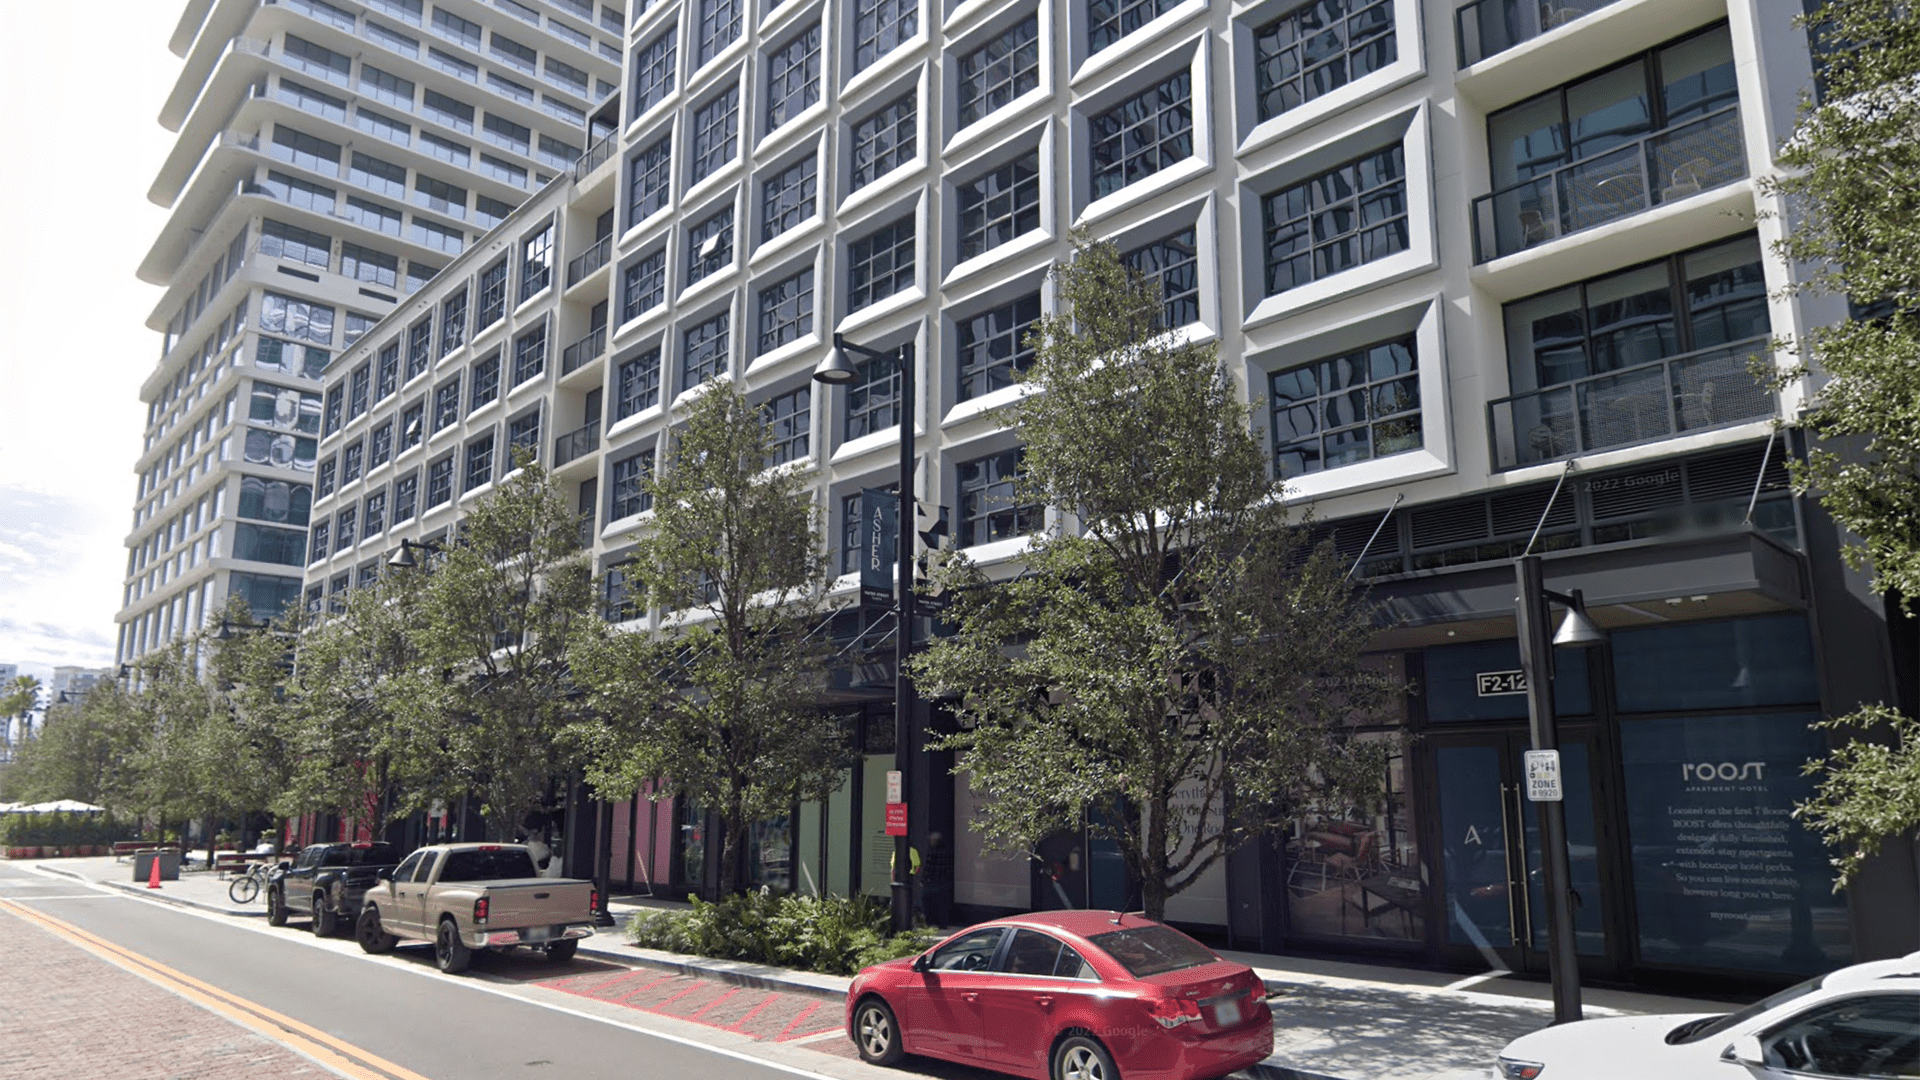 A street scape. Cars are parked on the side of the road. A brick patterned sidewalk runs down the center of the road. Trees provide shade on the sidewalk.